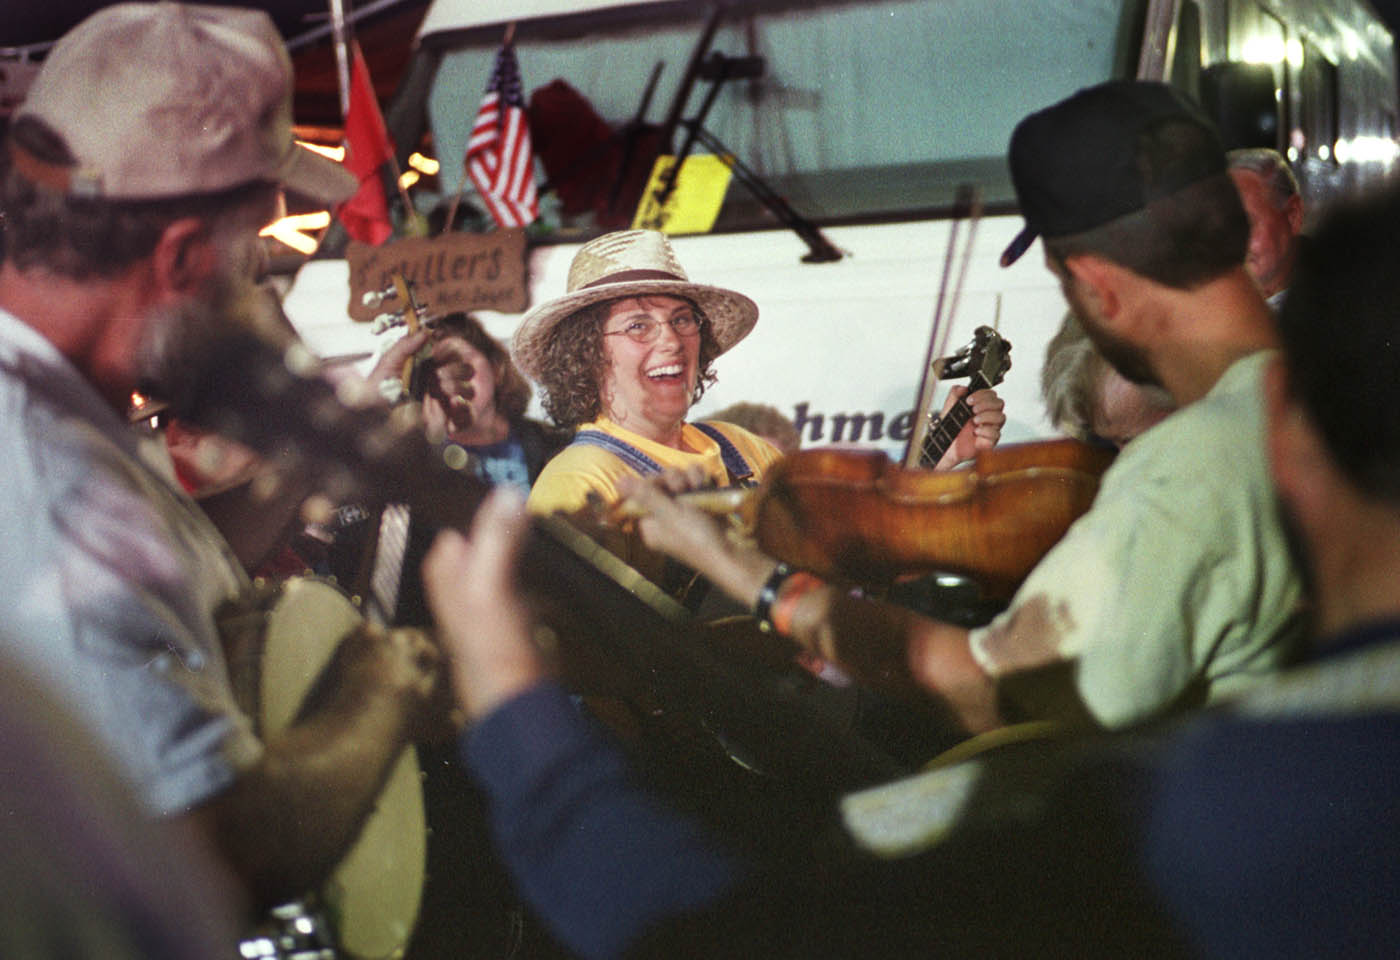 Trish Kilby, center, from Lancing, NC, was obviously having a great time picking banjo with The Blue Ridge Ramblers as they played in the campground area during the 67th Annual Old Fiddlers Convention in Galax, VA  Friday night,  August 9, 2002.    NOTE: FOR RT. 58 PROJECT.